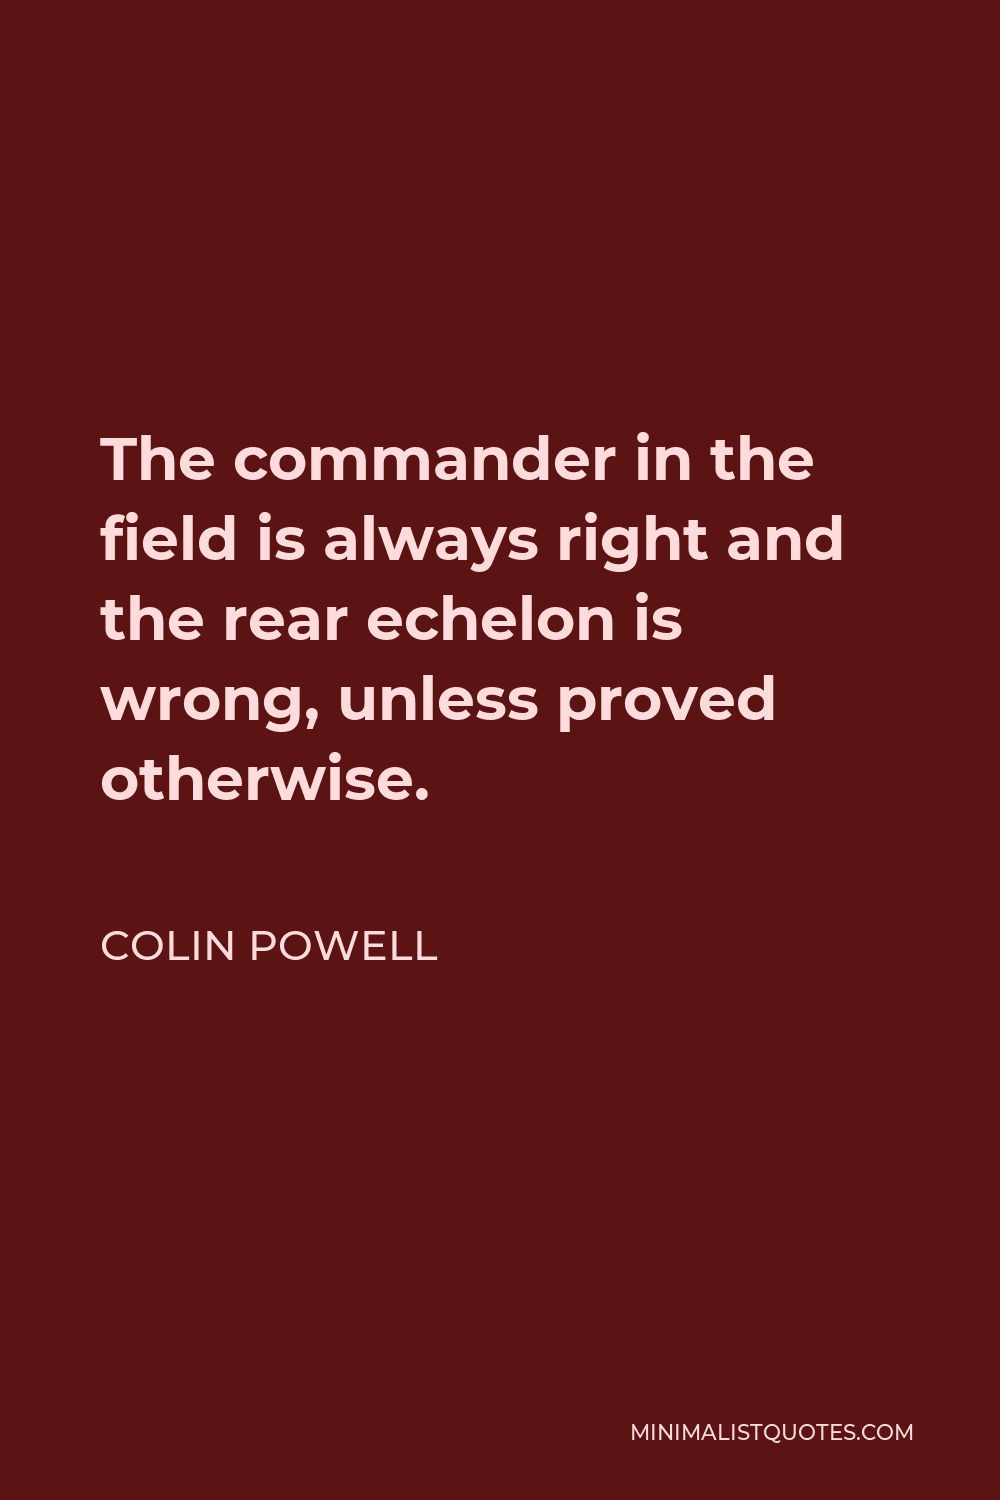 Colin Powell Quote - The commander in the field is always right and the rear echelon is wrong, unless proved otherwise.